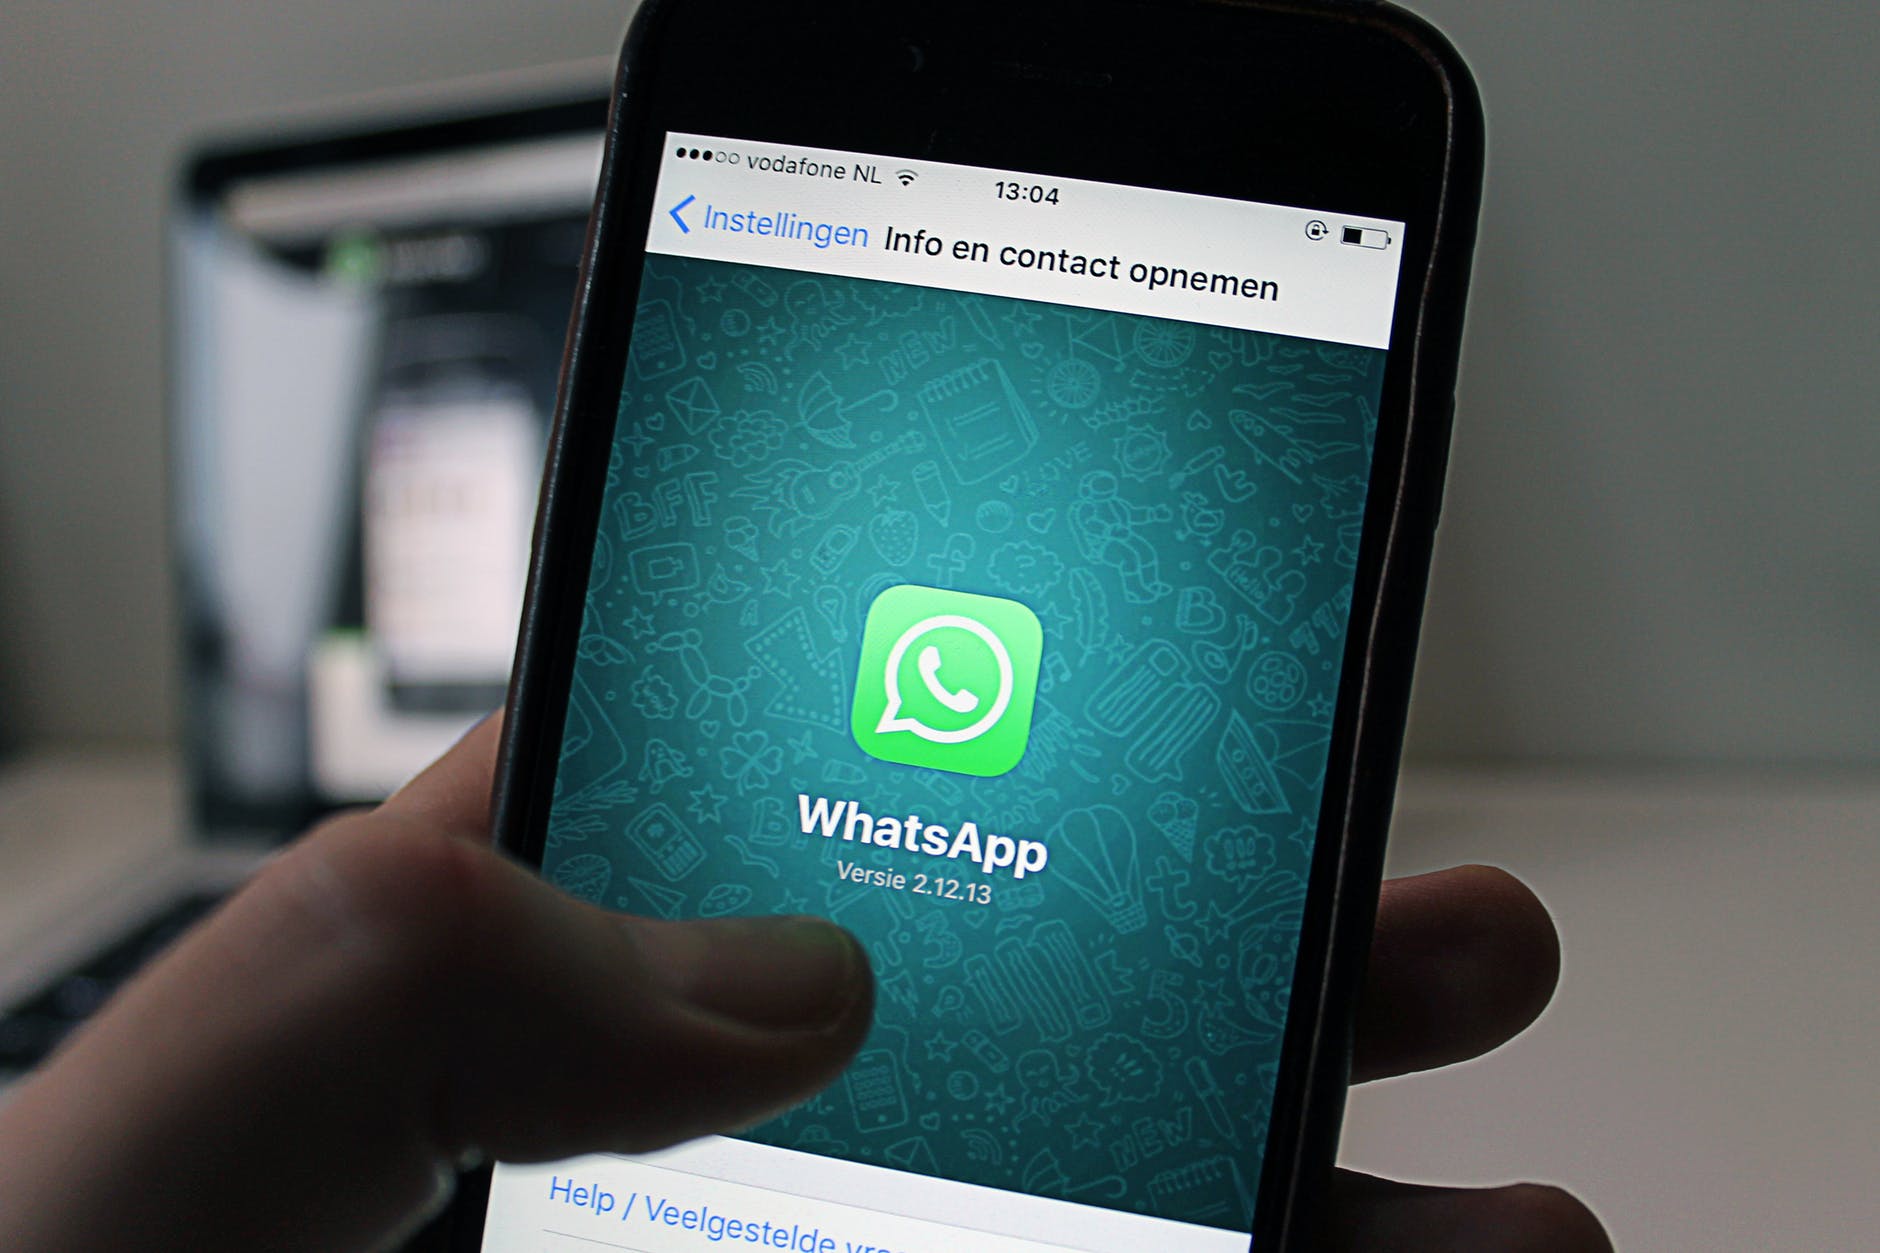 Companies might face penalties for using WhatsApp – here’s why and what to do instead